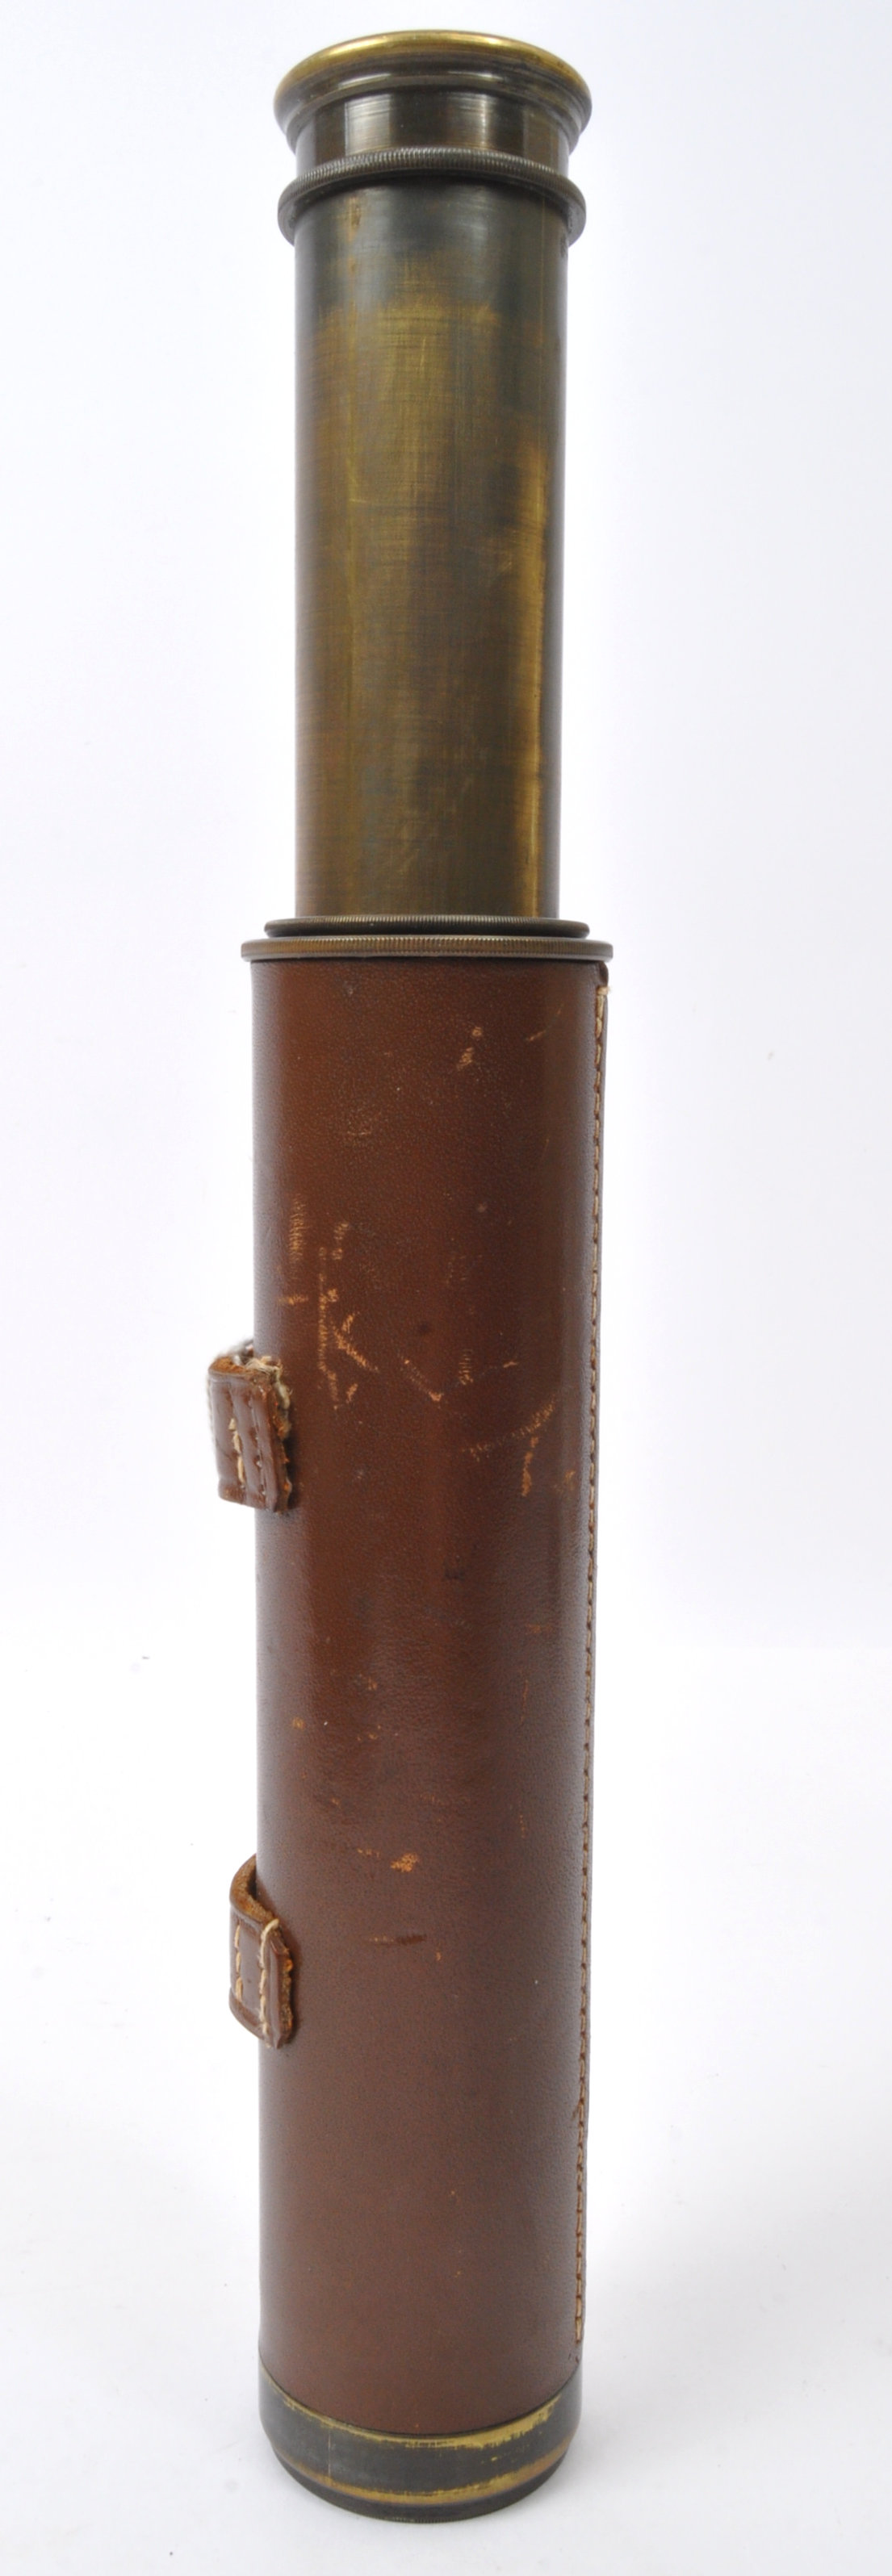 EARLY 20TH CENTURY NELSON BRASS & LEATHER TELESCOPE - Image 5 of 5